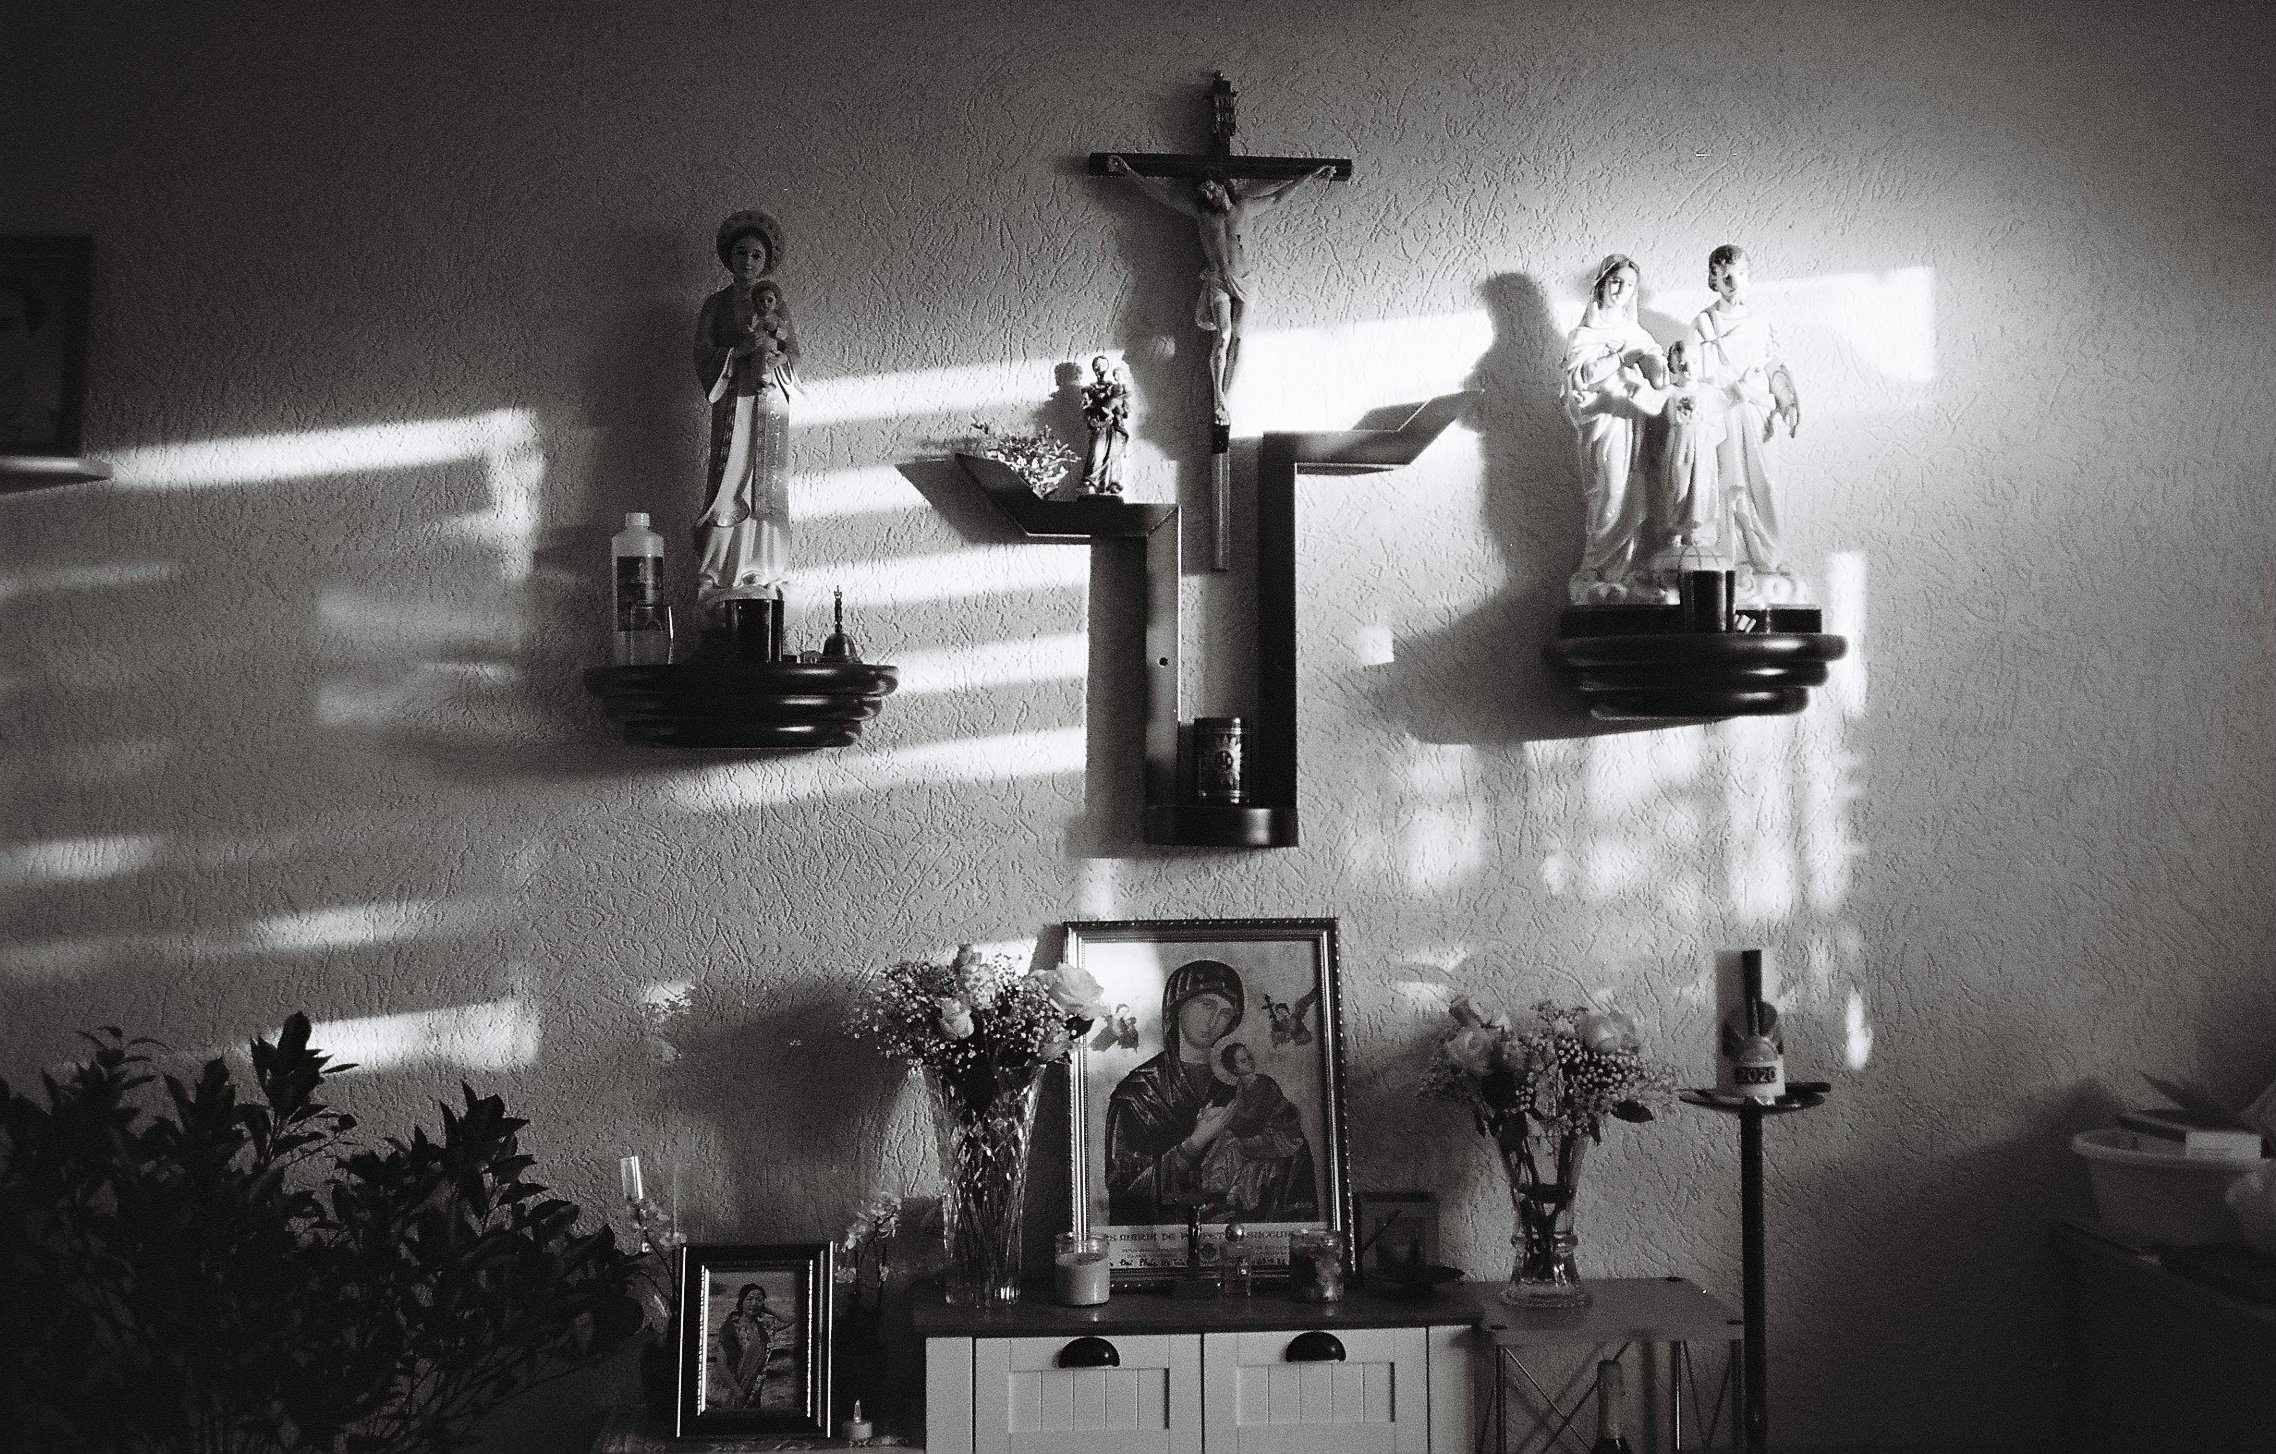 A wall with christian symbols, statues and pictures.